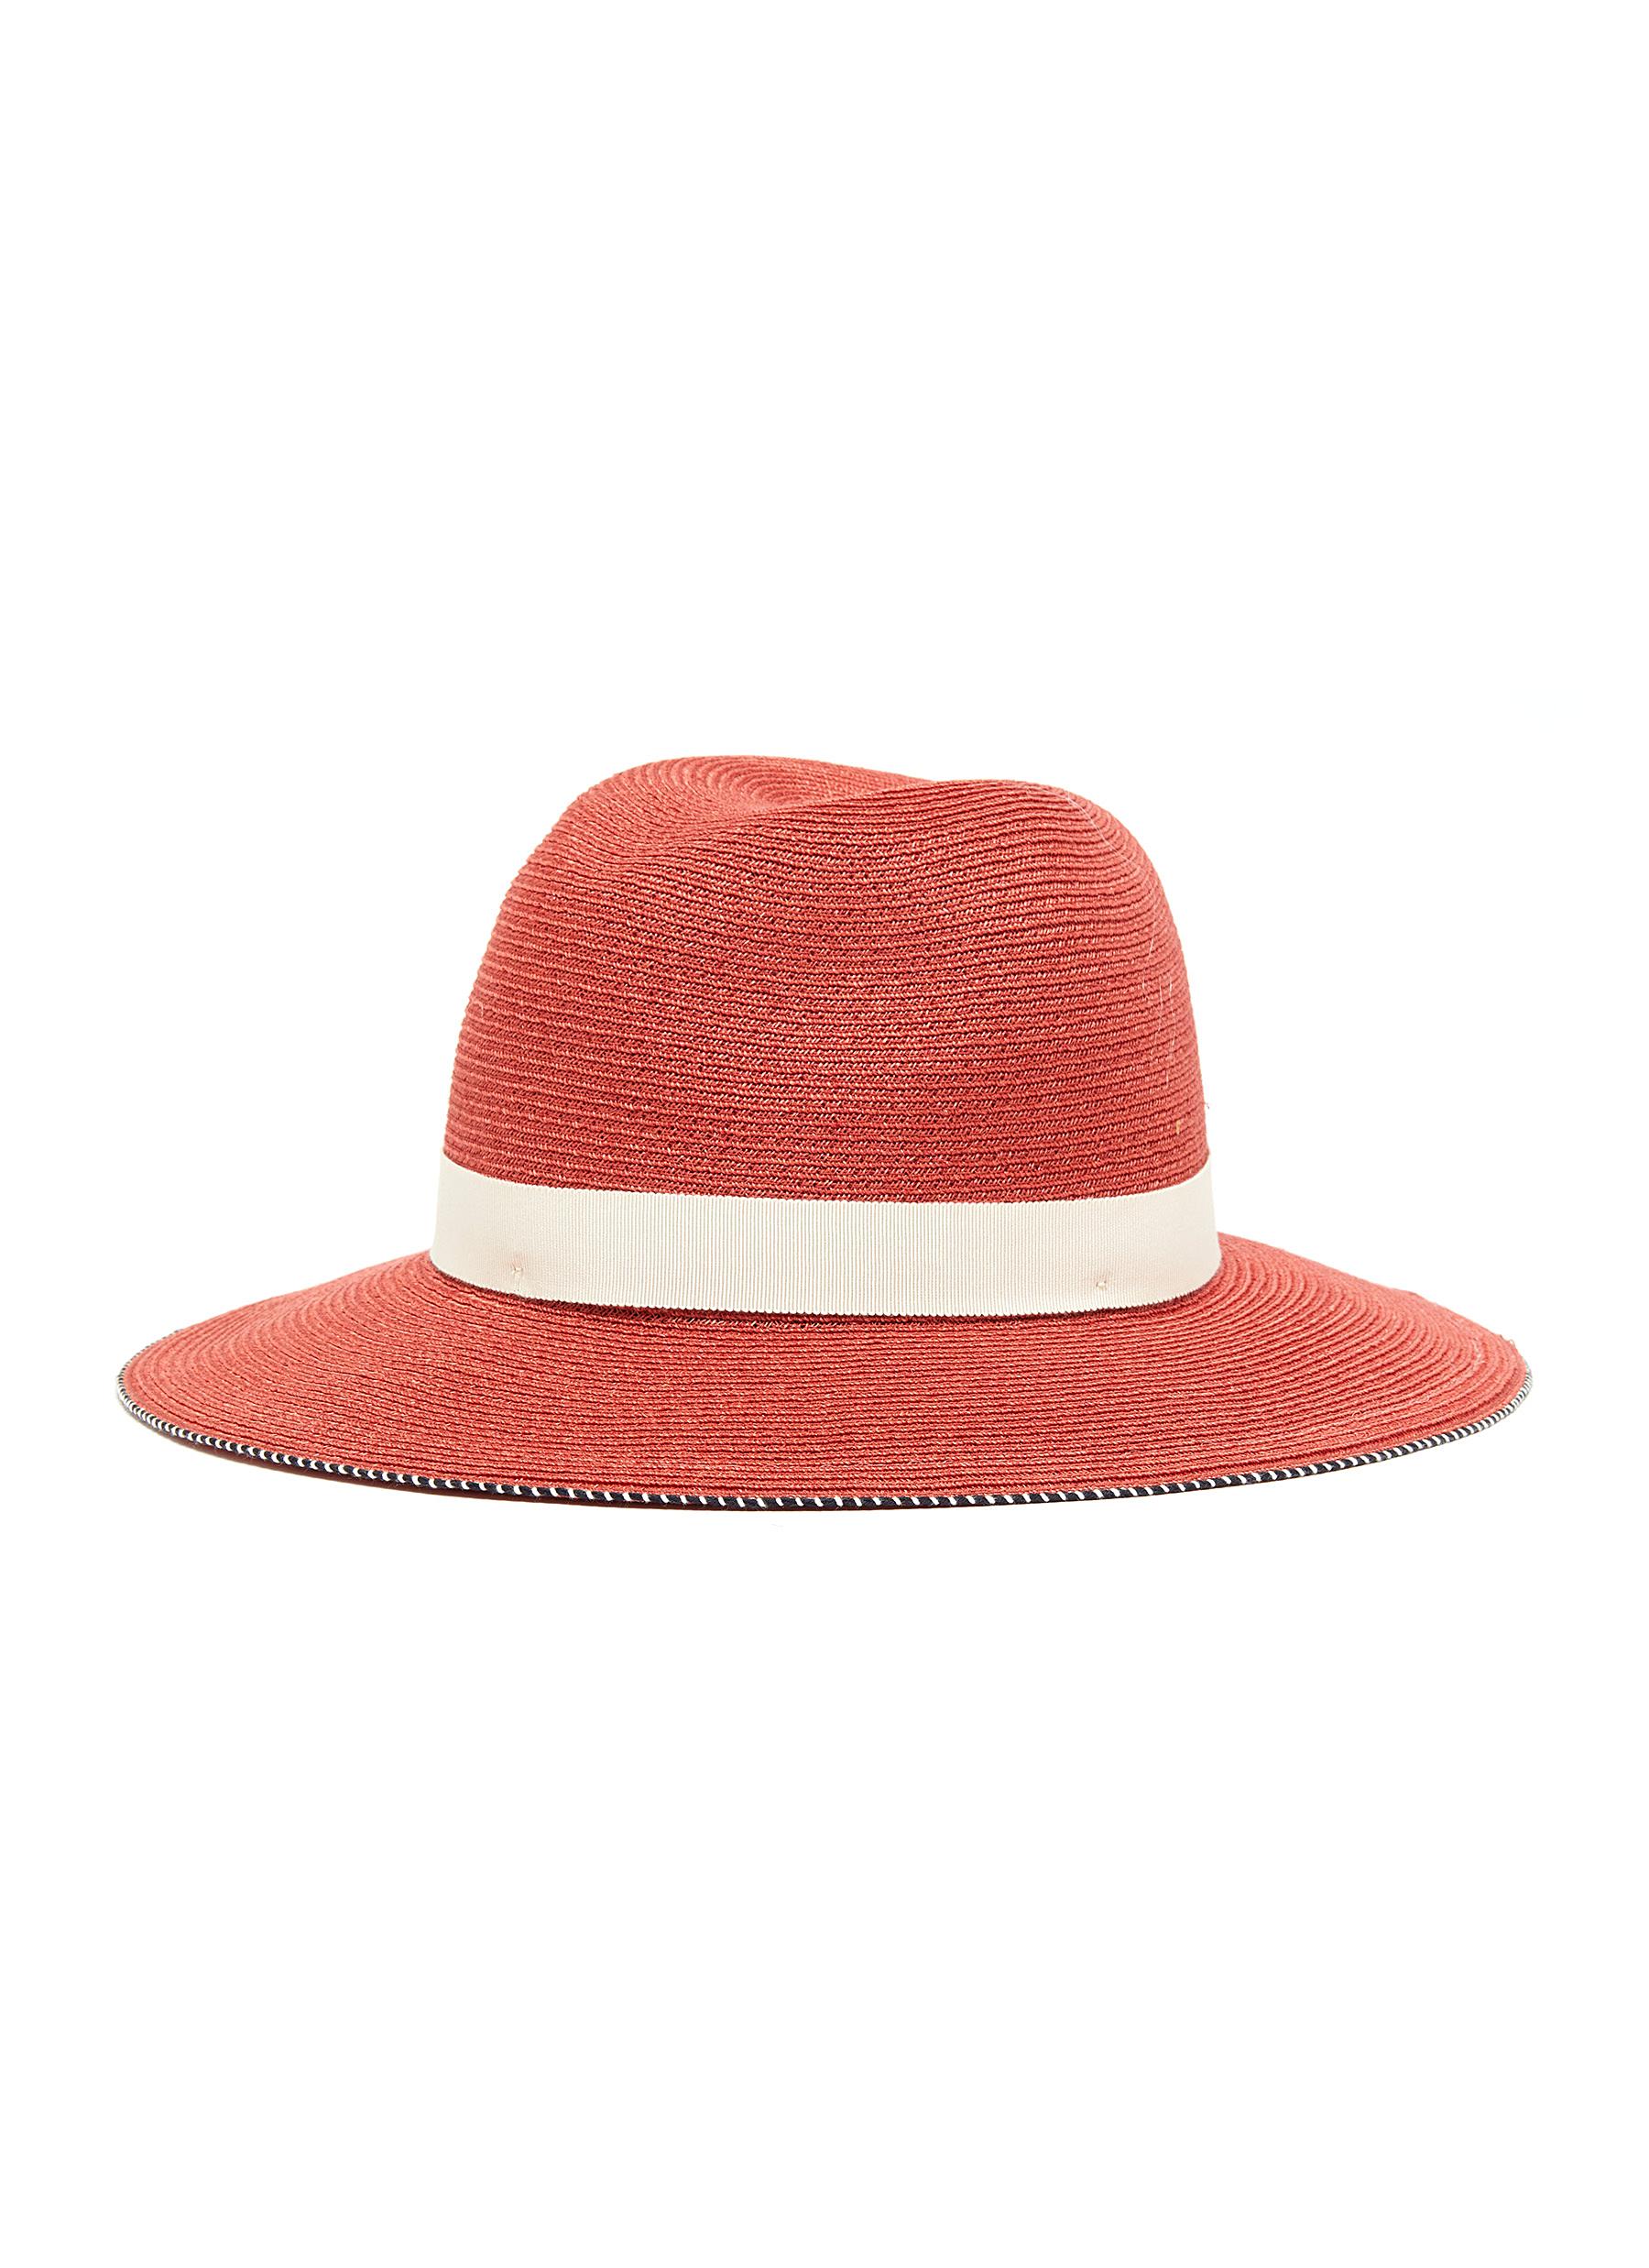 EUGENIA KIM 'COURTNEY' CONTRAST PIPING GROSGRAIN BAND FEDORA HAT